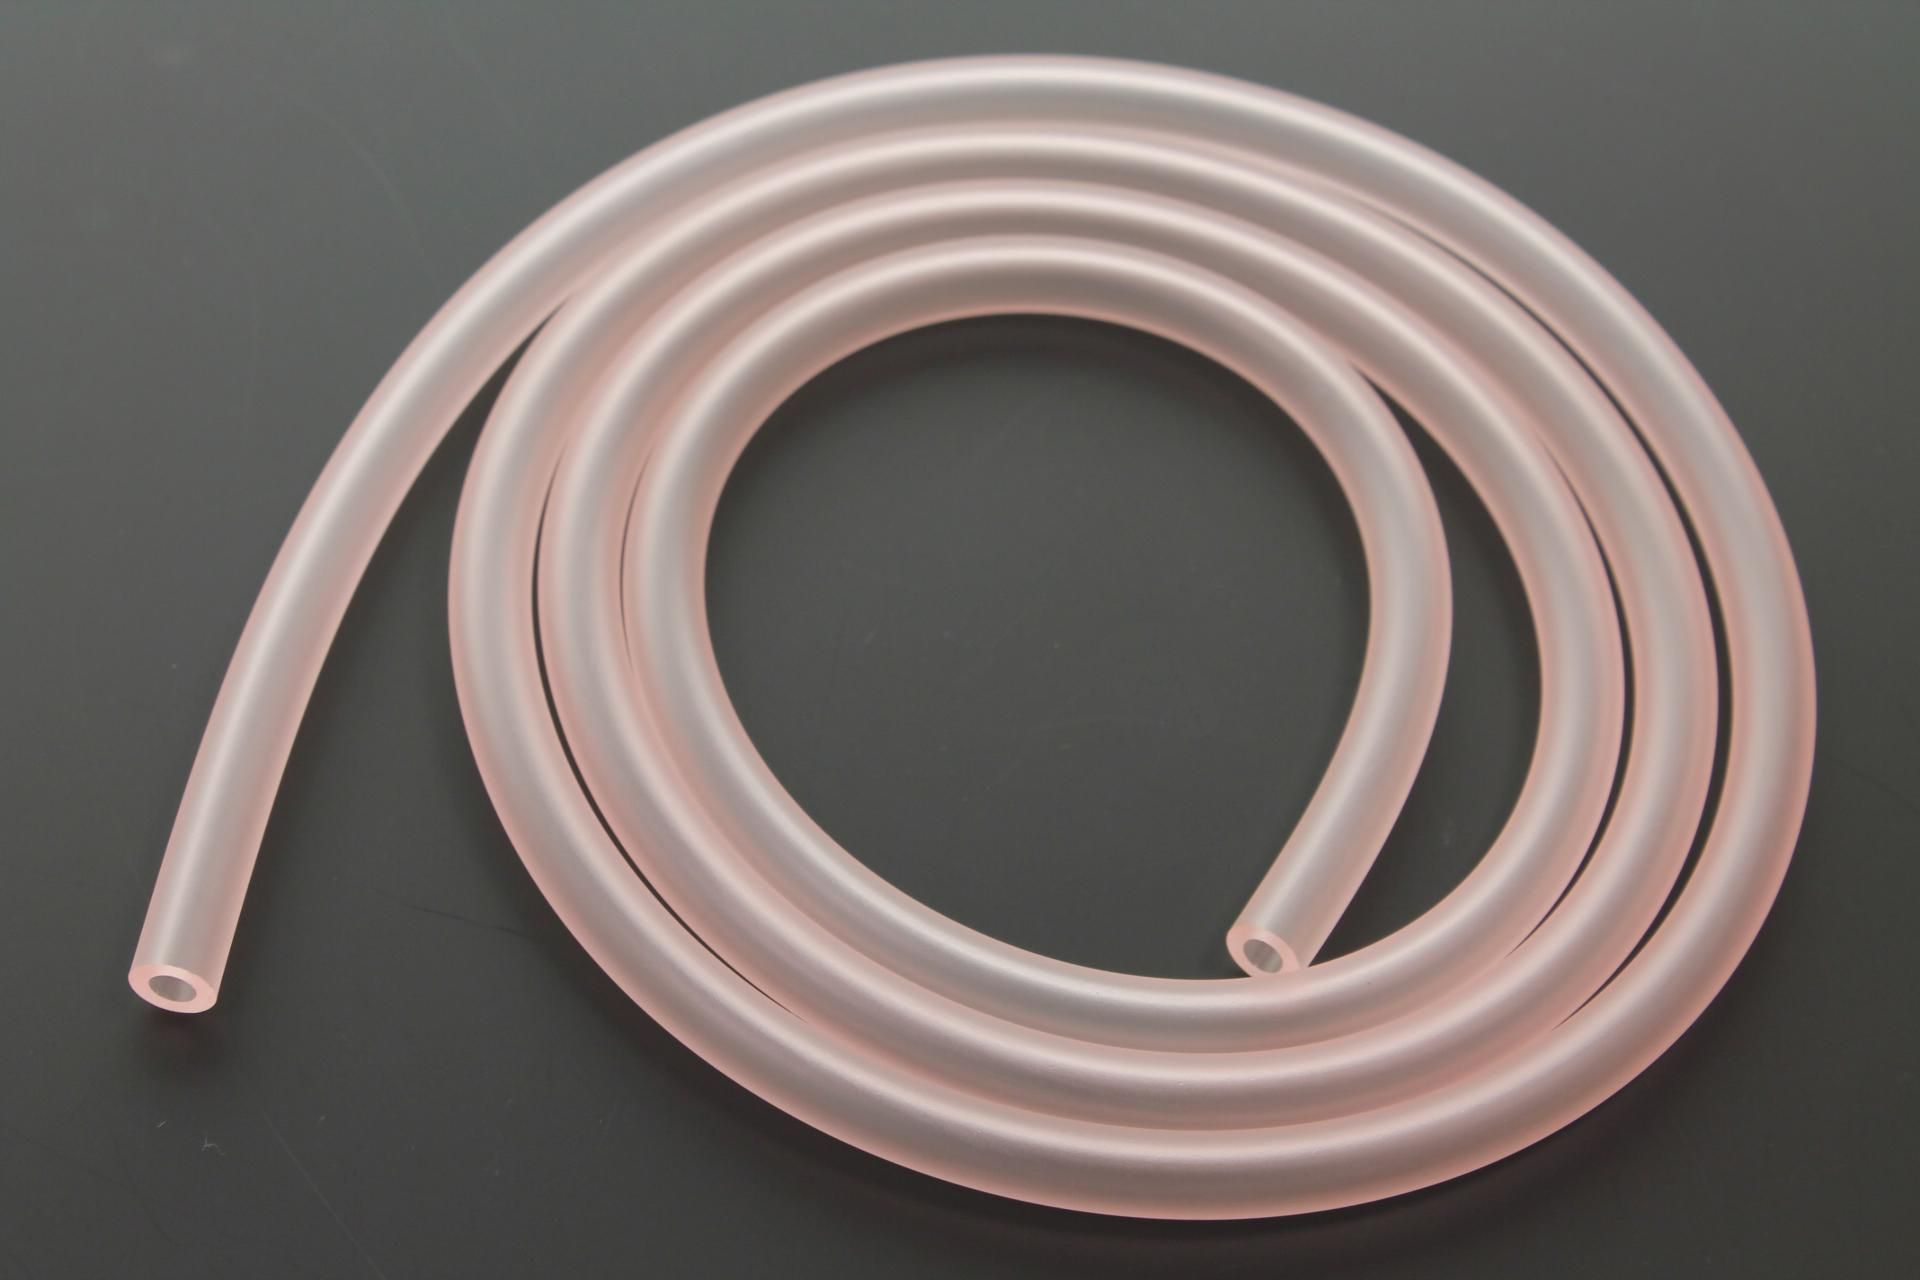 91A20-05120-00 Superseded by 91A20-05145-00 - TUBE, FLEXIBLE